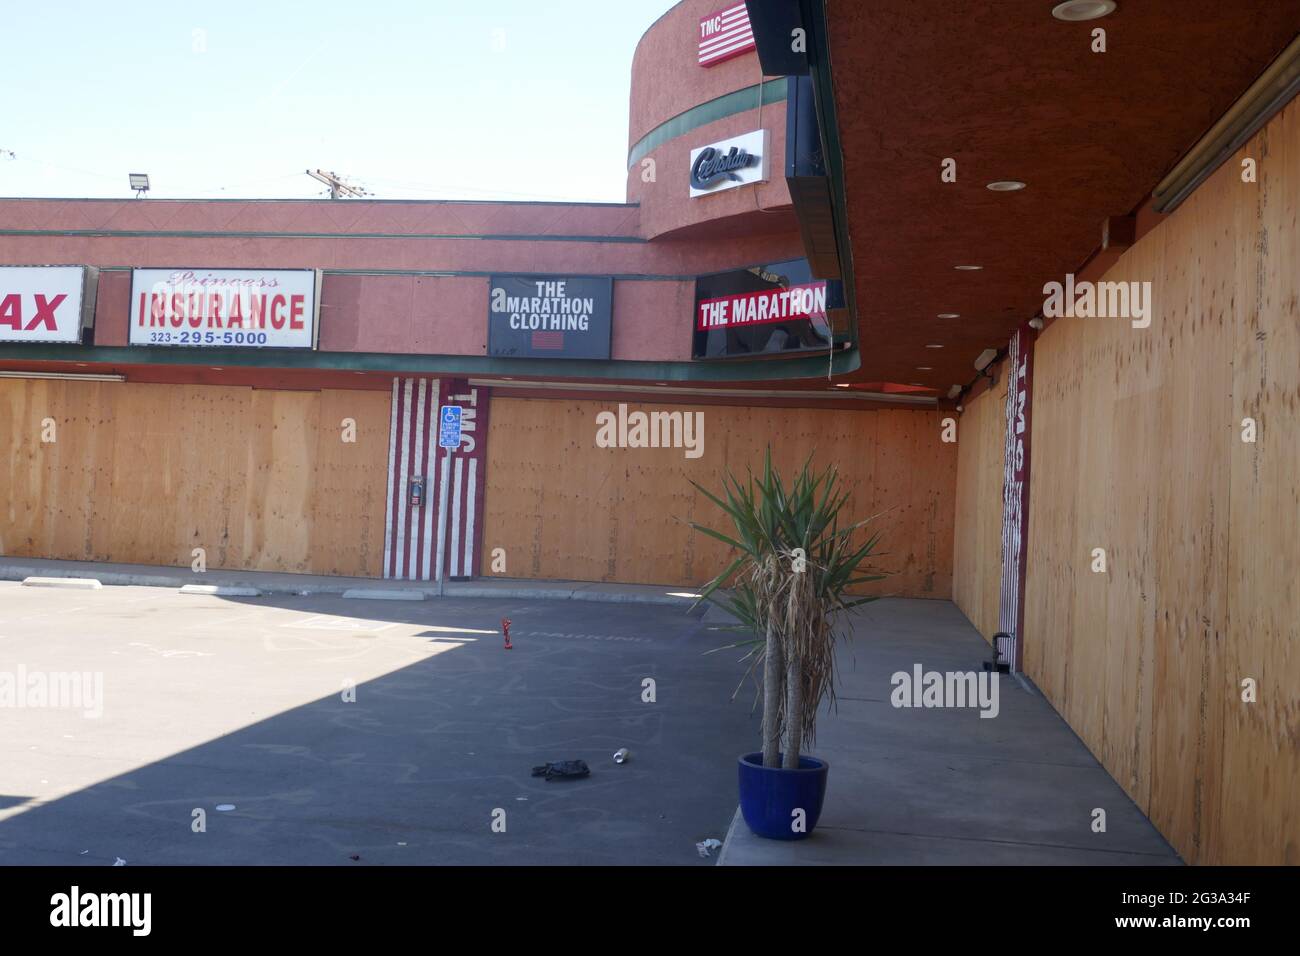 Los Angeles, California, USA 14th June 2021 A general view of atmosphere of Rapper Nipsey Hussle's The Marathon Clothing Store where he was murdered March 31, 2019, now boarded up closed with Street Art Memorial Murals on June 14, 2021 in Los Angeles, California, USA. Photo by Barry King/Alamy Stock Photo Stock Photo